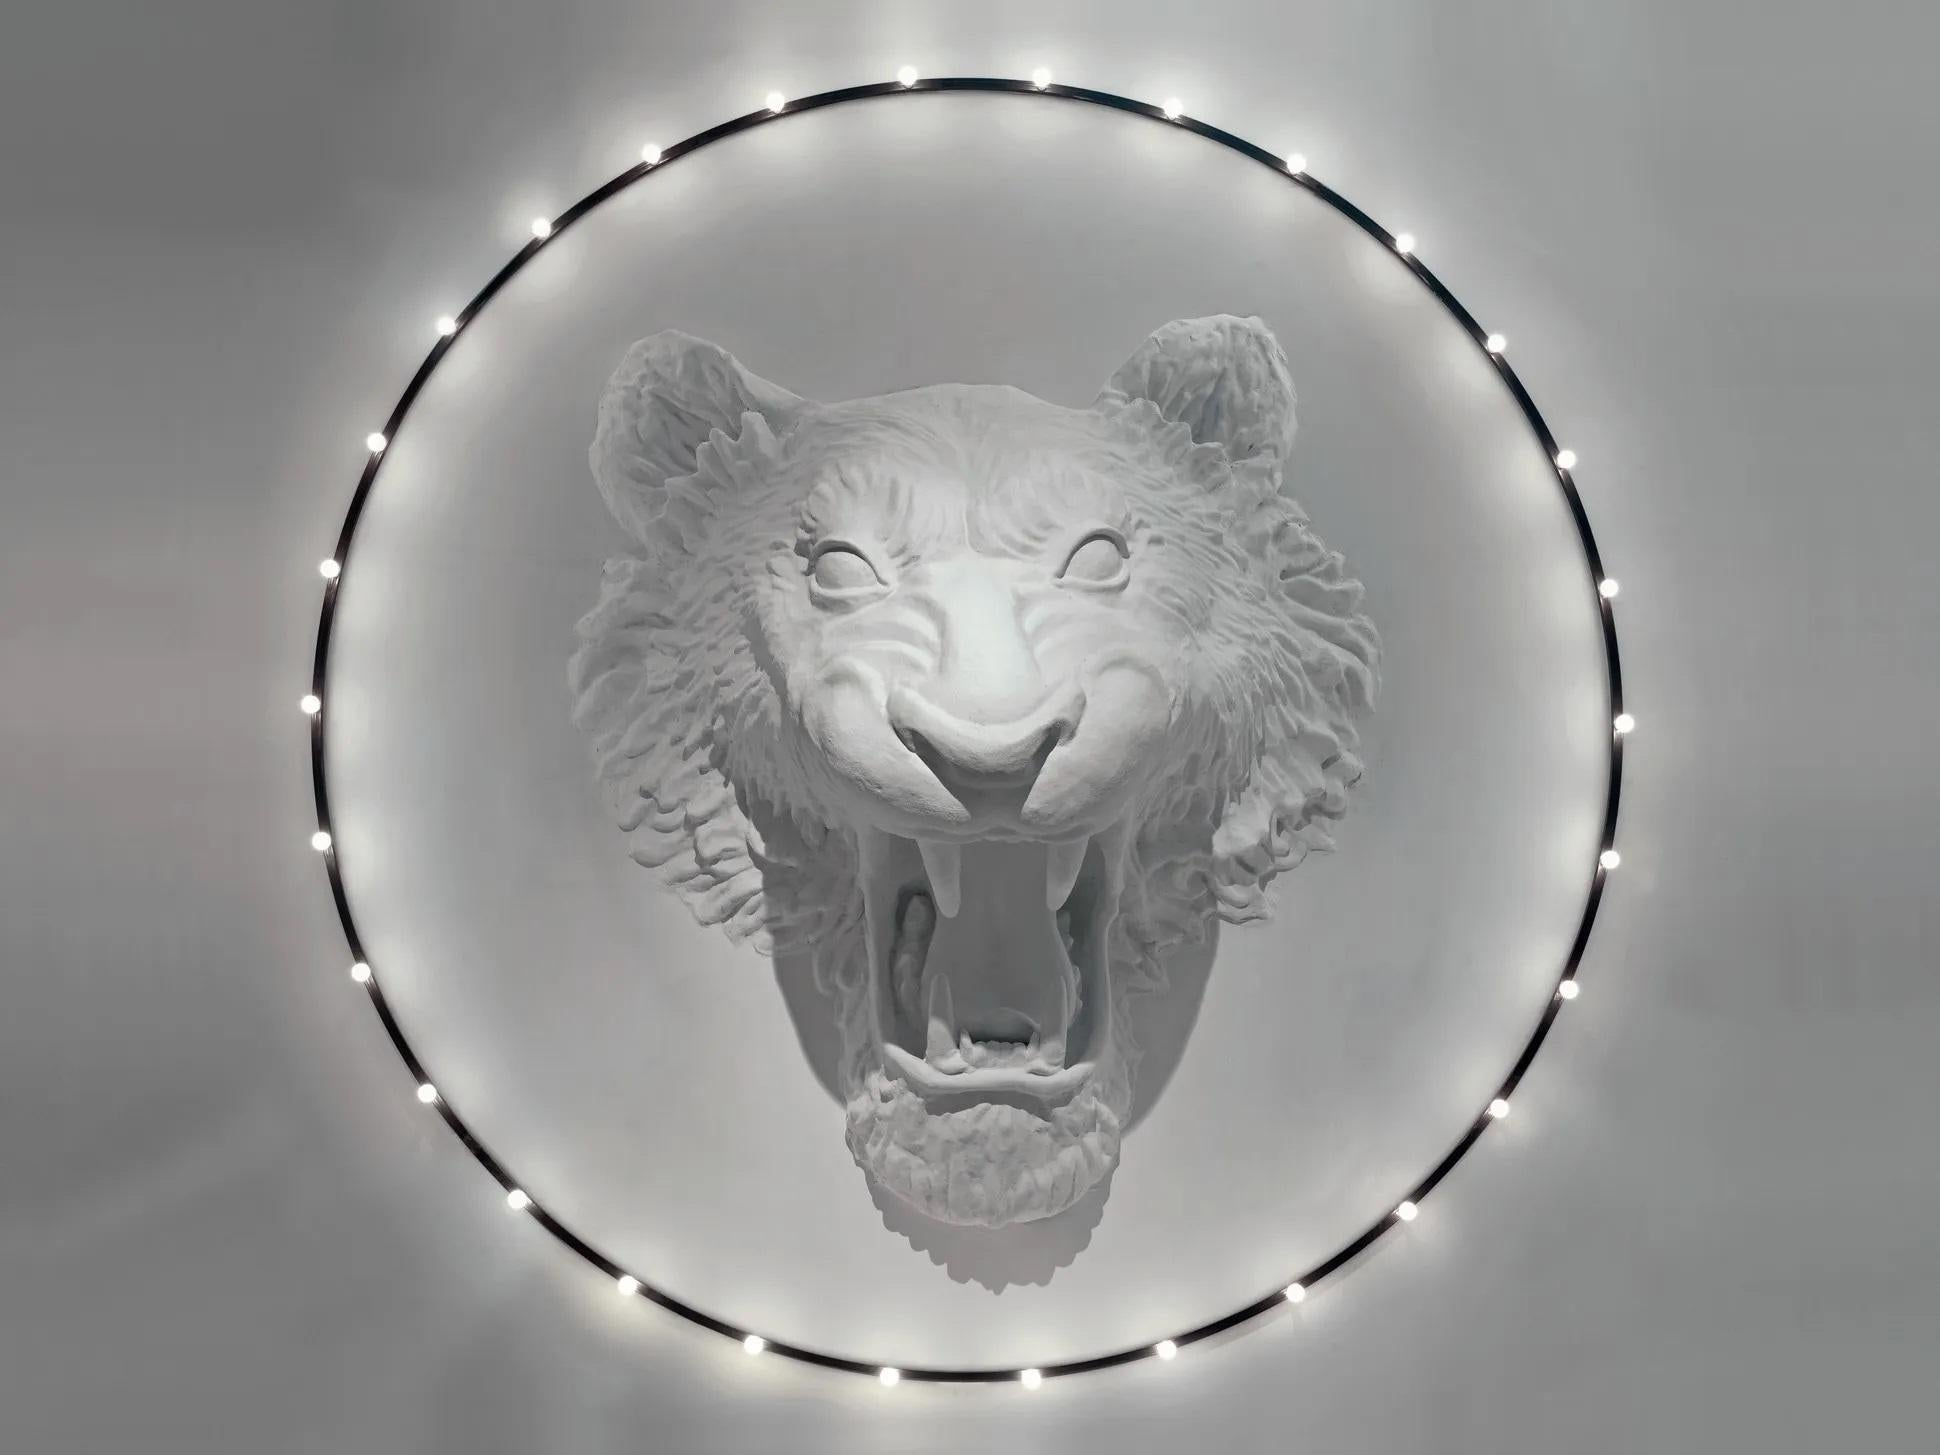 Circus wall lamp by Imperfettolab
2012
Designer : Verter Turroni
Dimensions: D 400 X H 130 cm
Materials: Fibreglass

An installation of great impact and large dimensions. Inspired by an imaginative circus, in which a roaring lion seems to jump